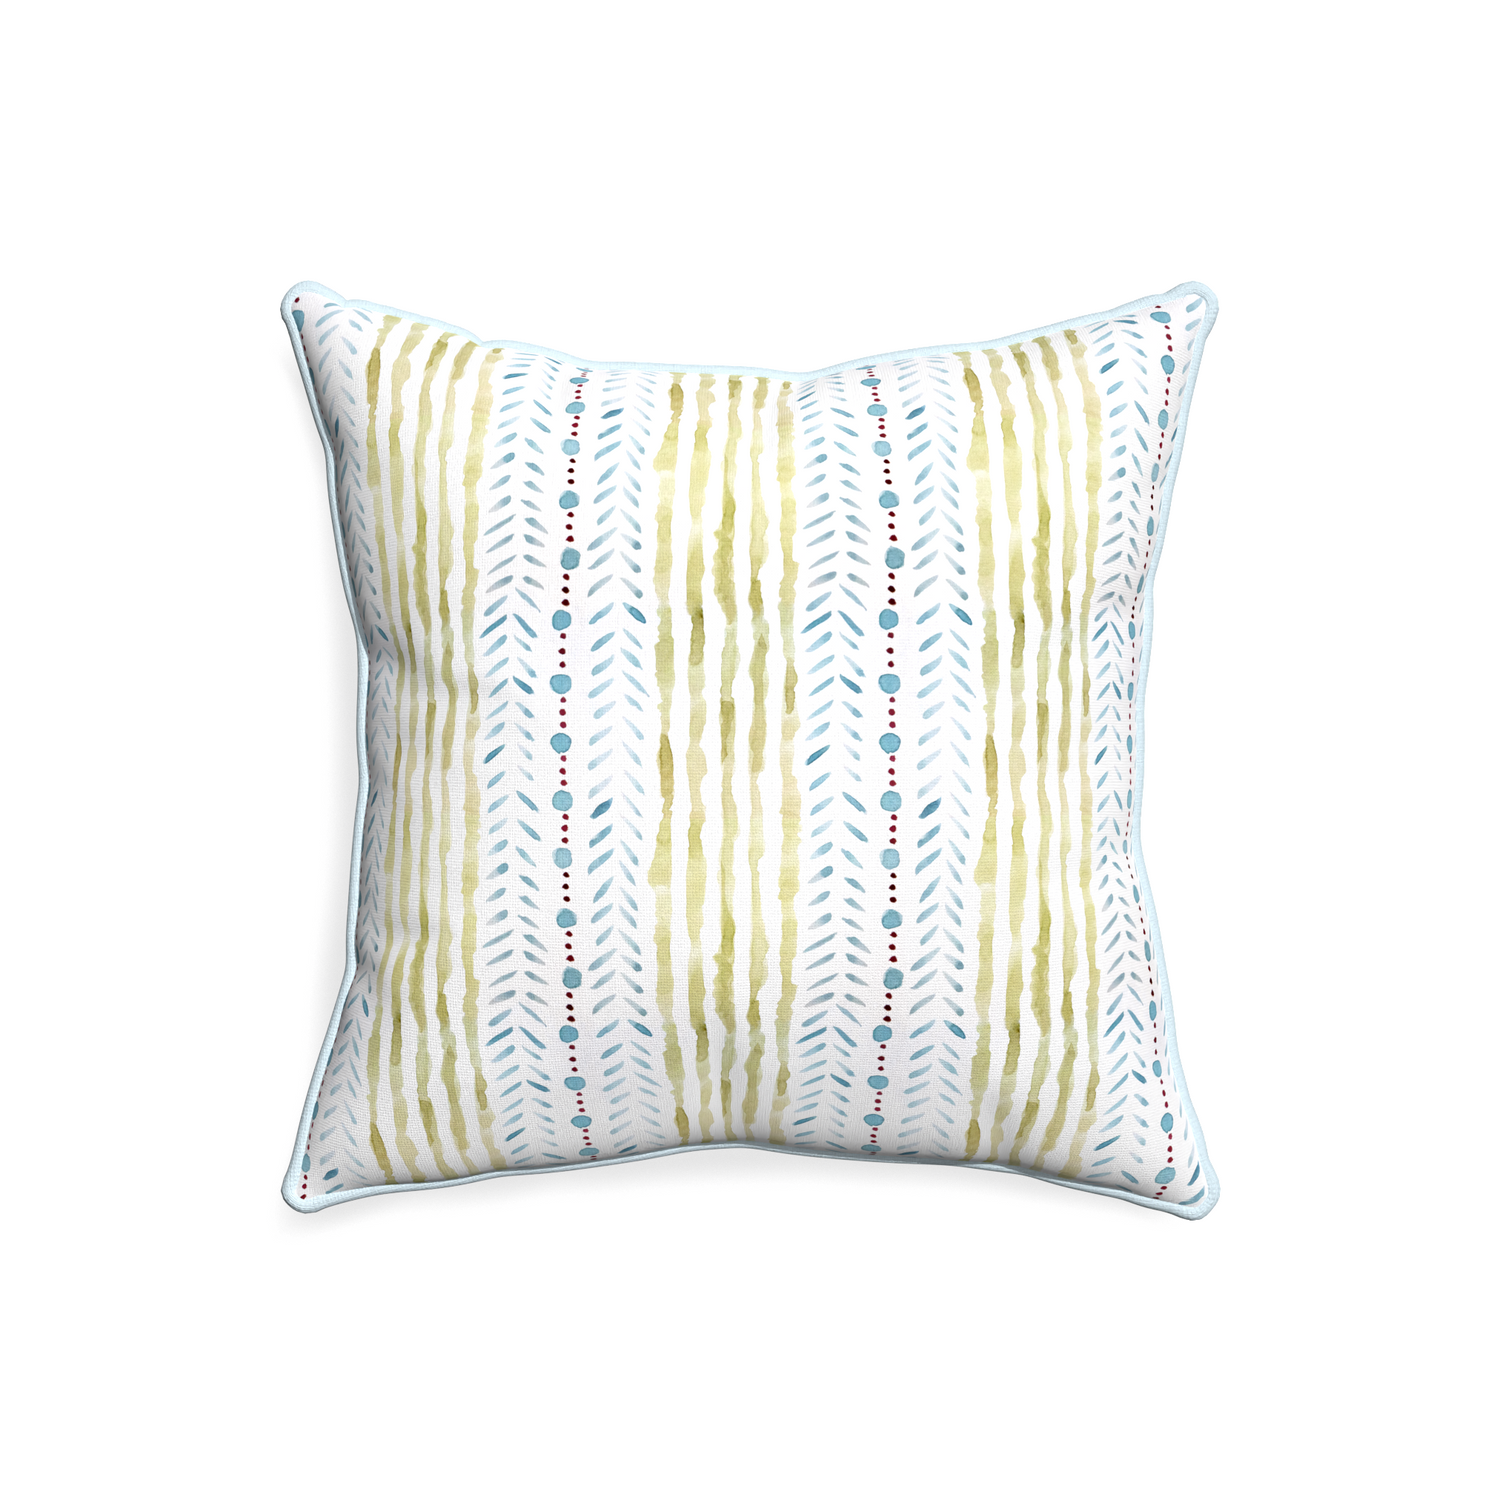 20-square julia custom blue & green stripedpillow with powder piping on white background